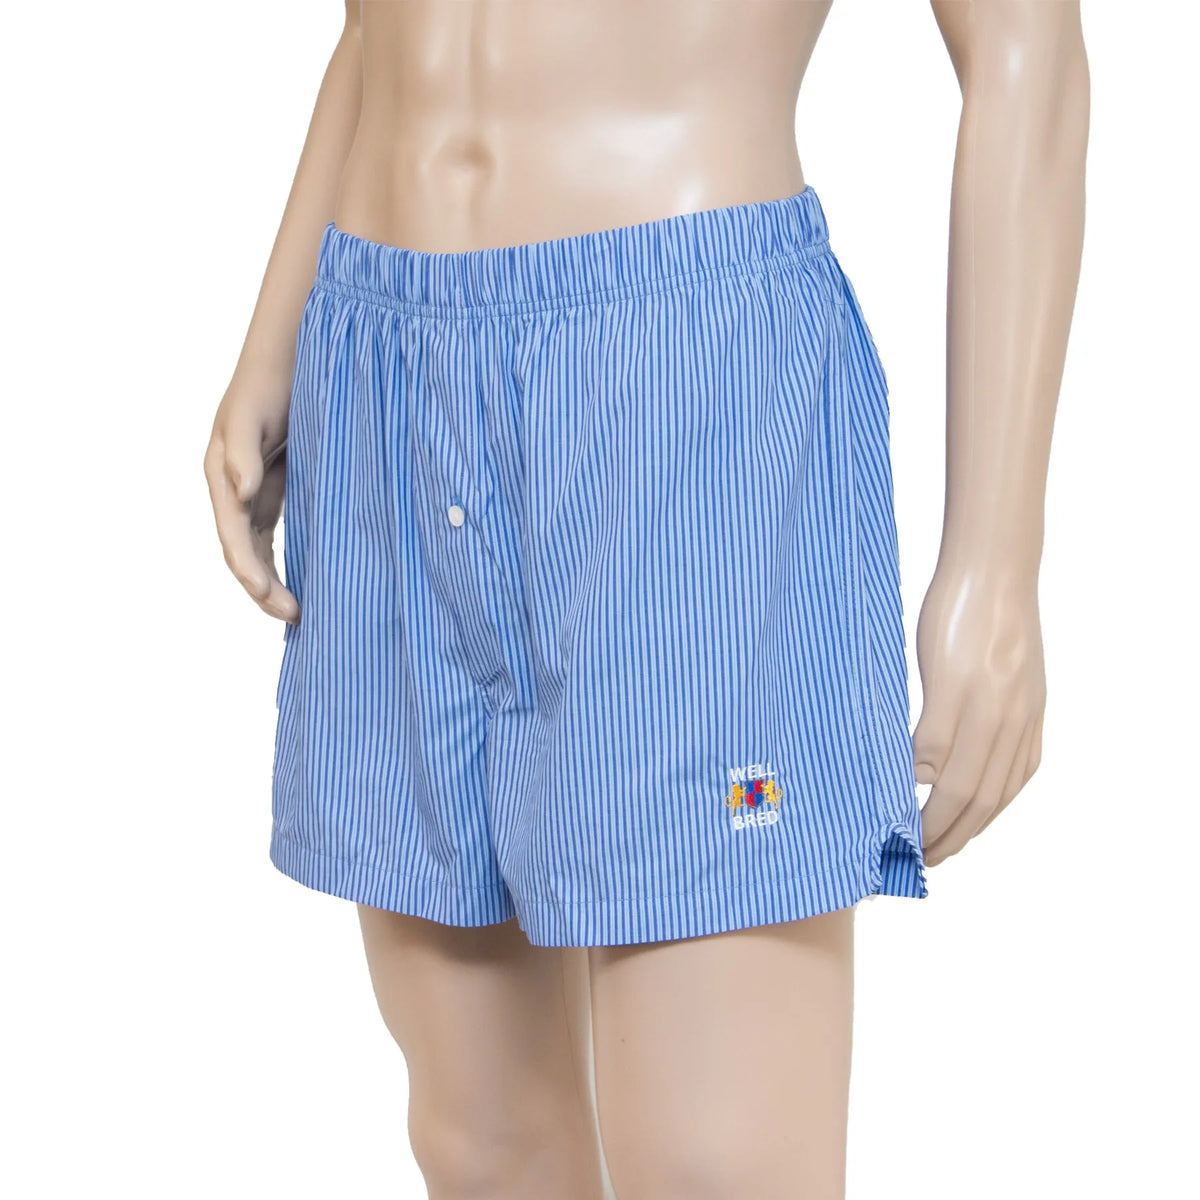 All American Boxer Shorts - All American Clothing Co